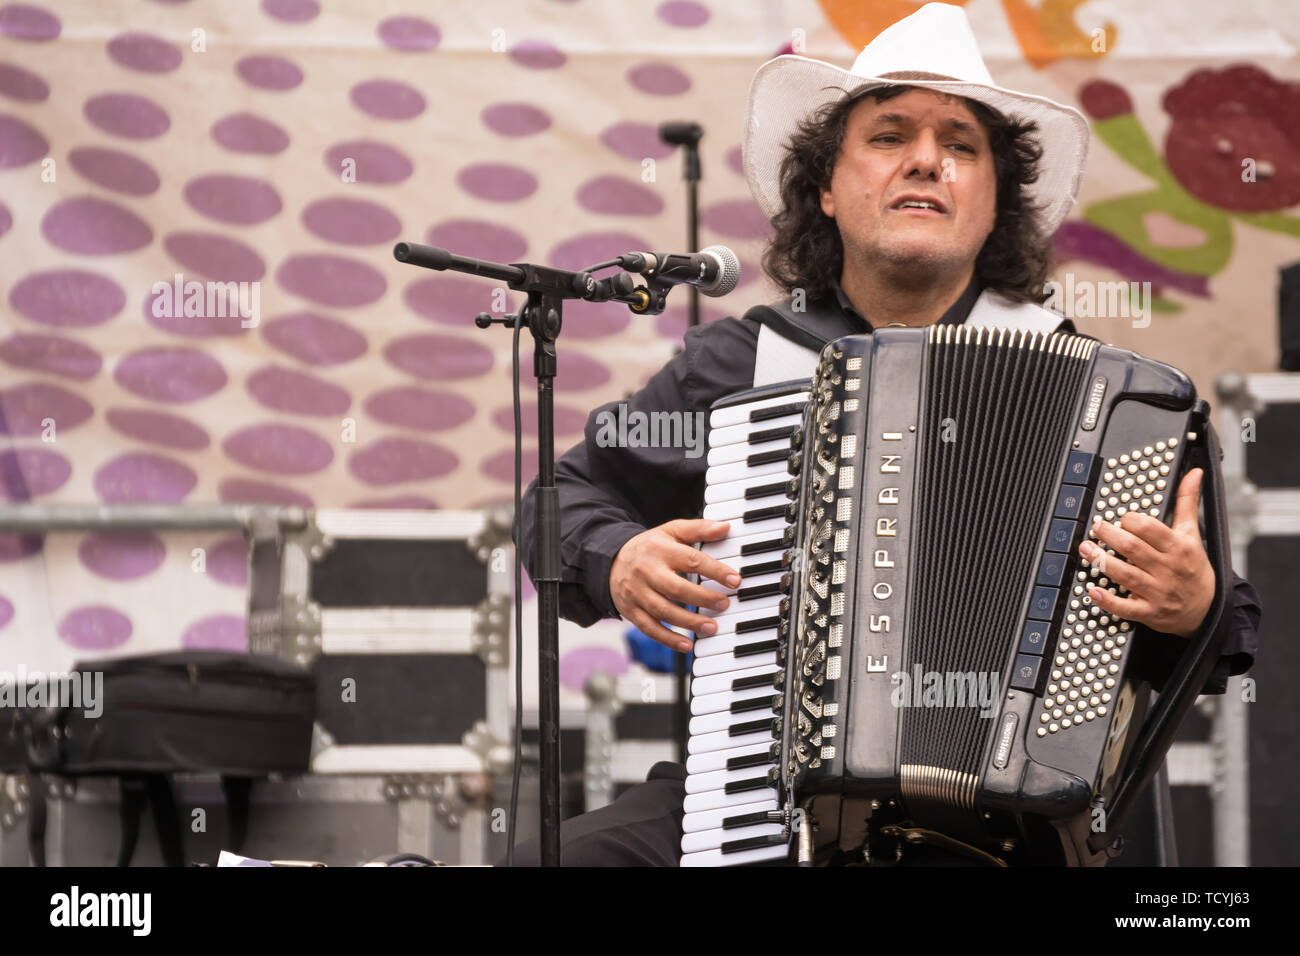 Chieti, Italy - May 18, 2019: The singer ROM Santino Spinelli performs at the Festa dei Popoli in Chieti Stock Photo